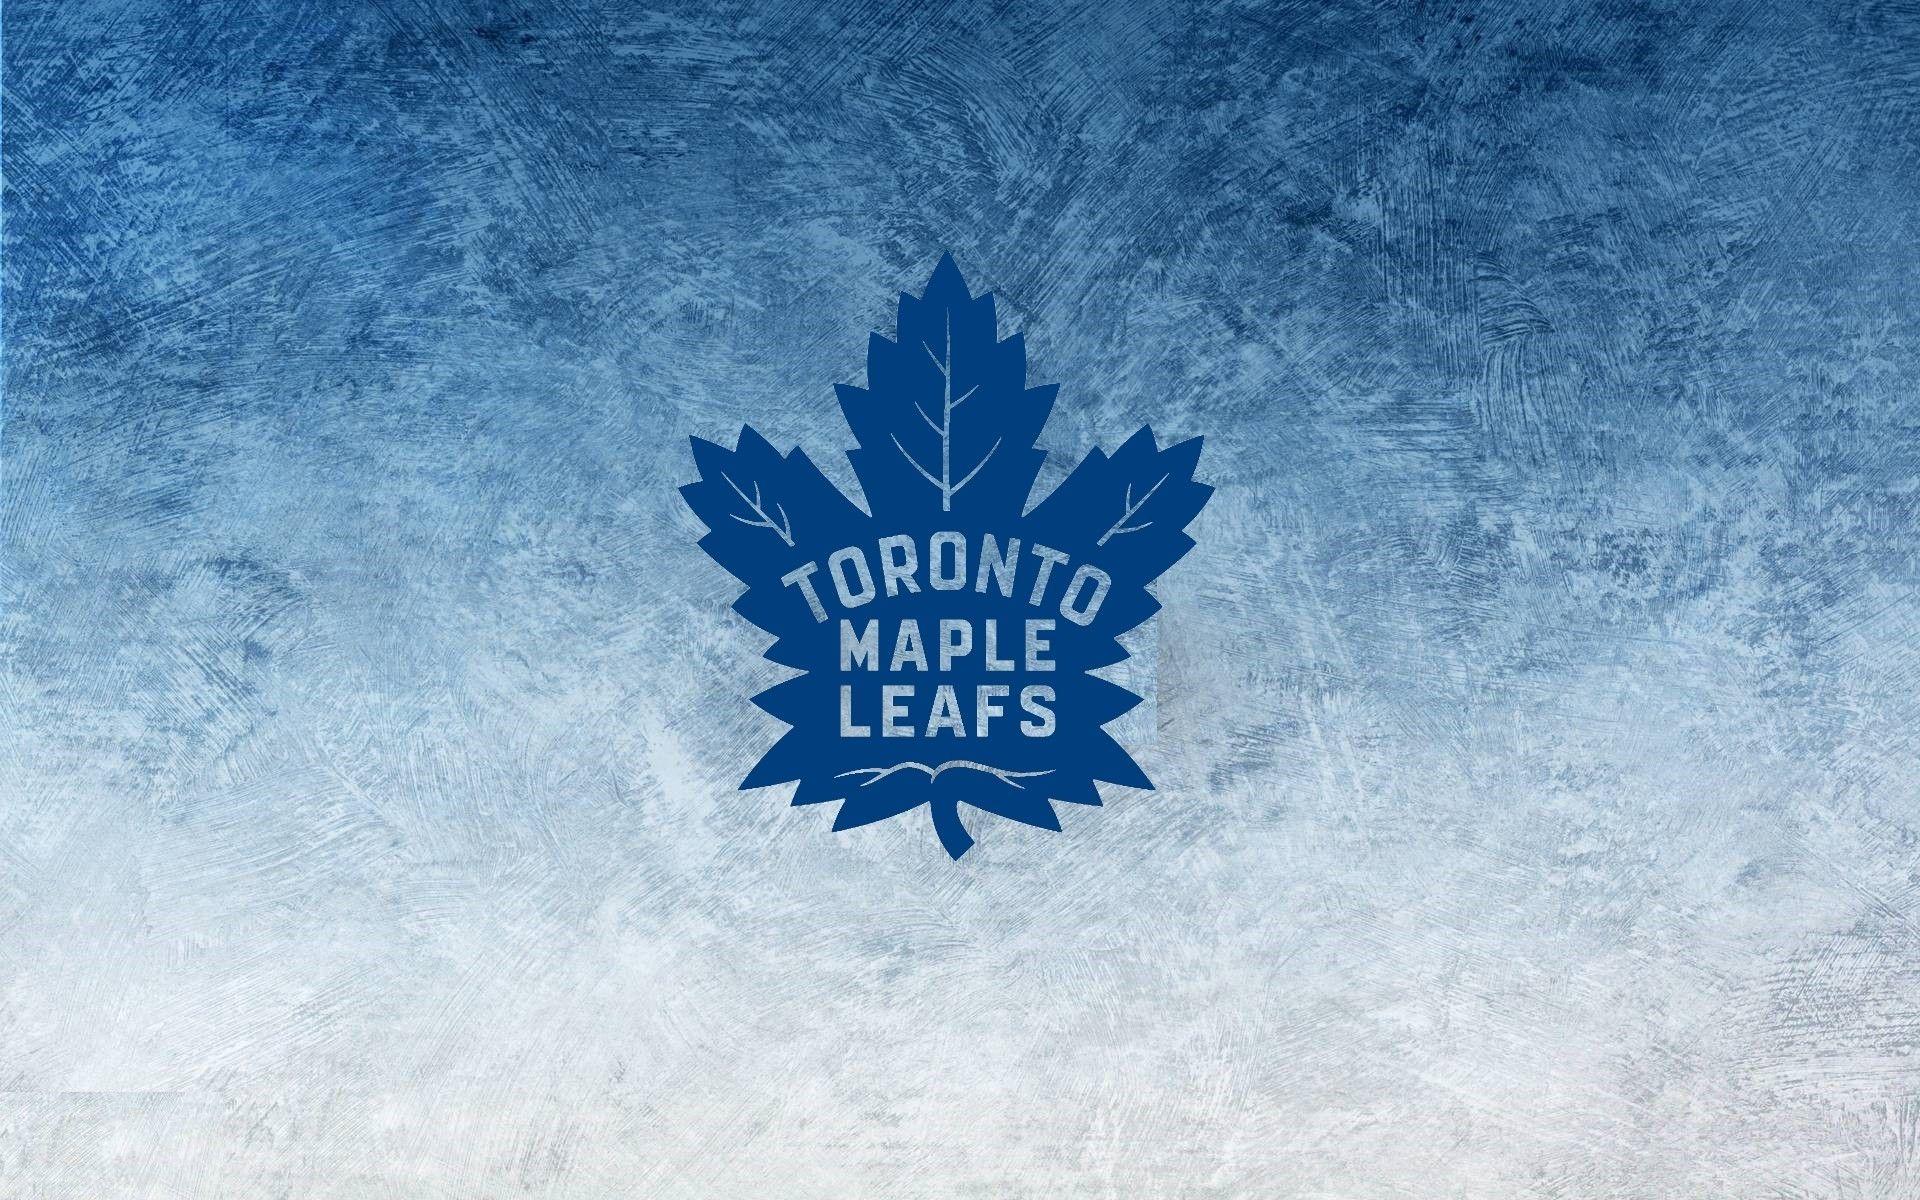 Toronto Maple Leafs Wallpapers - Top Free Toronto Maple Leafs